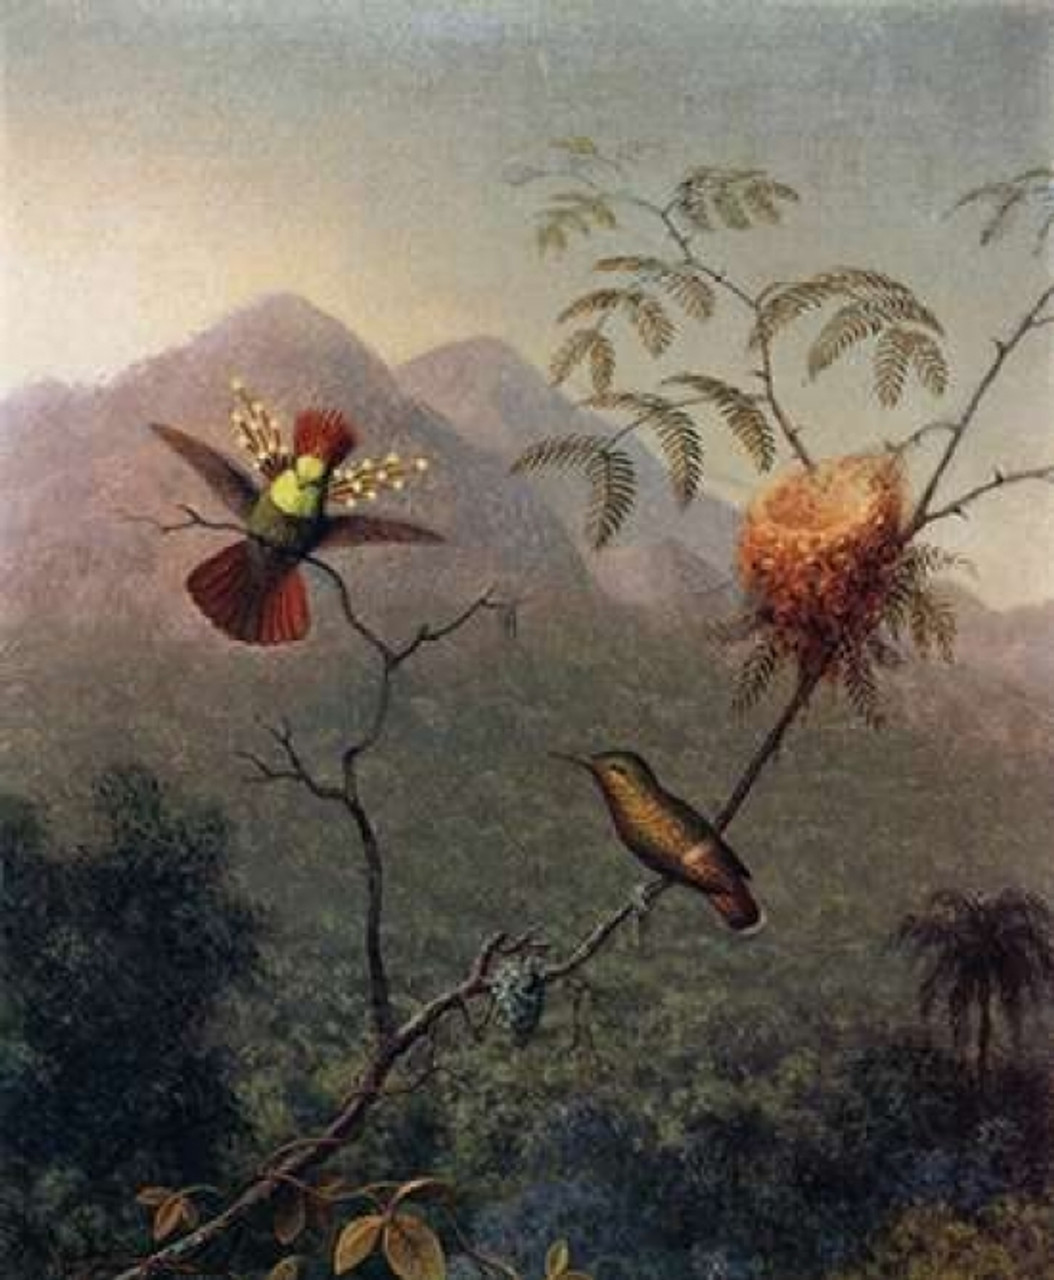 Tufted Coquette Poster Print by Martin Johnson Heade - Item